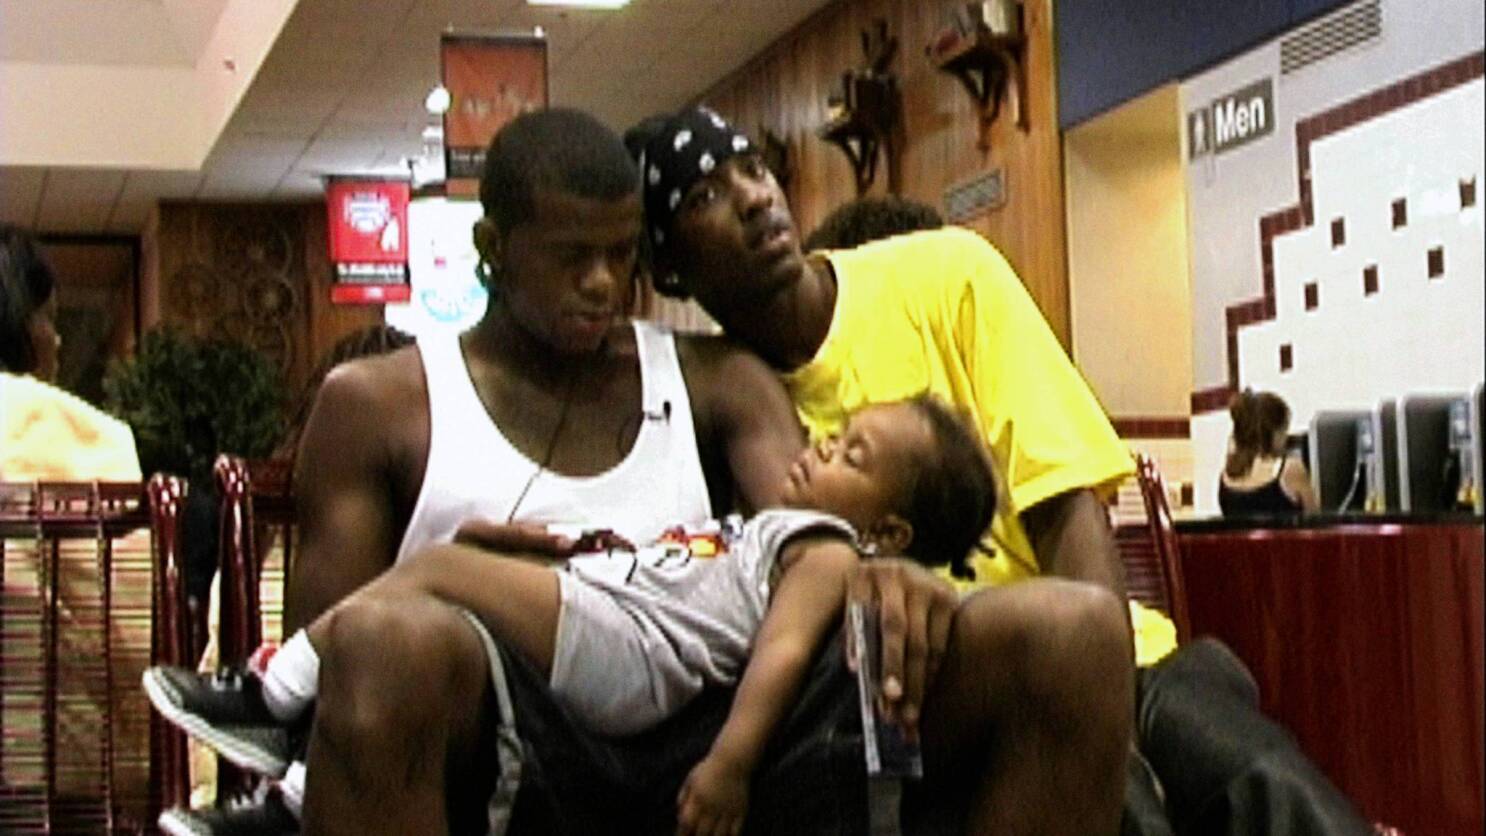 Lenny Cooke' proves long odds of NBA stardom apply to everyone